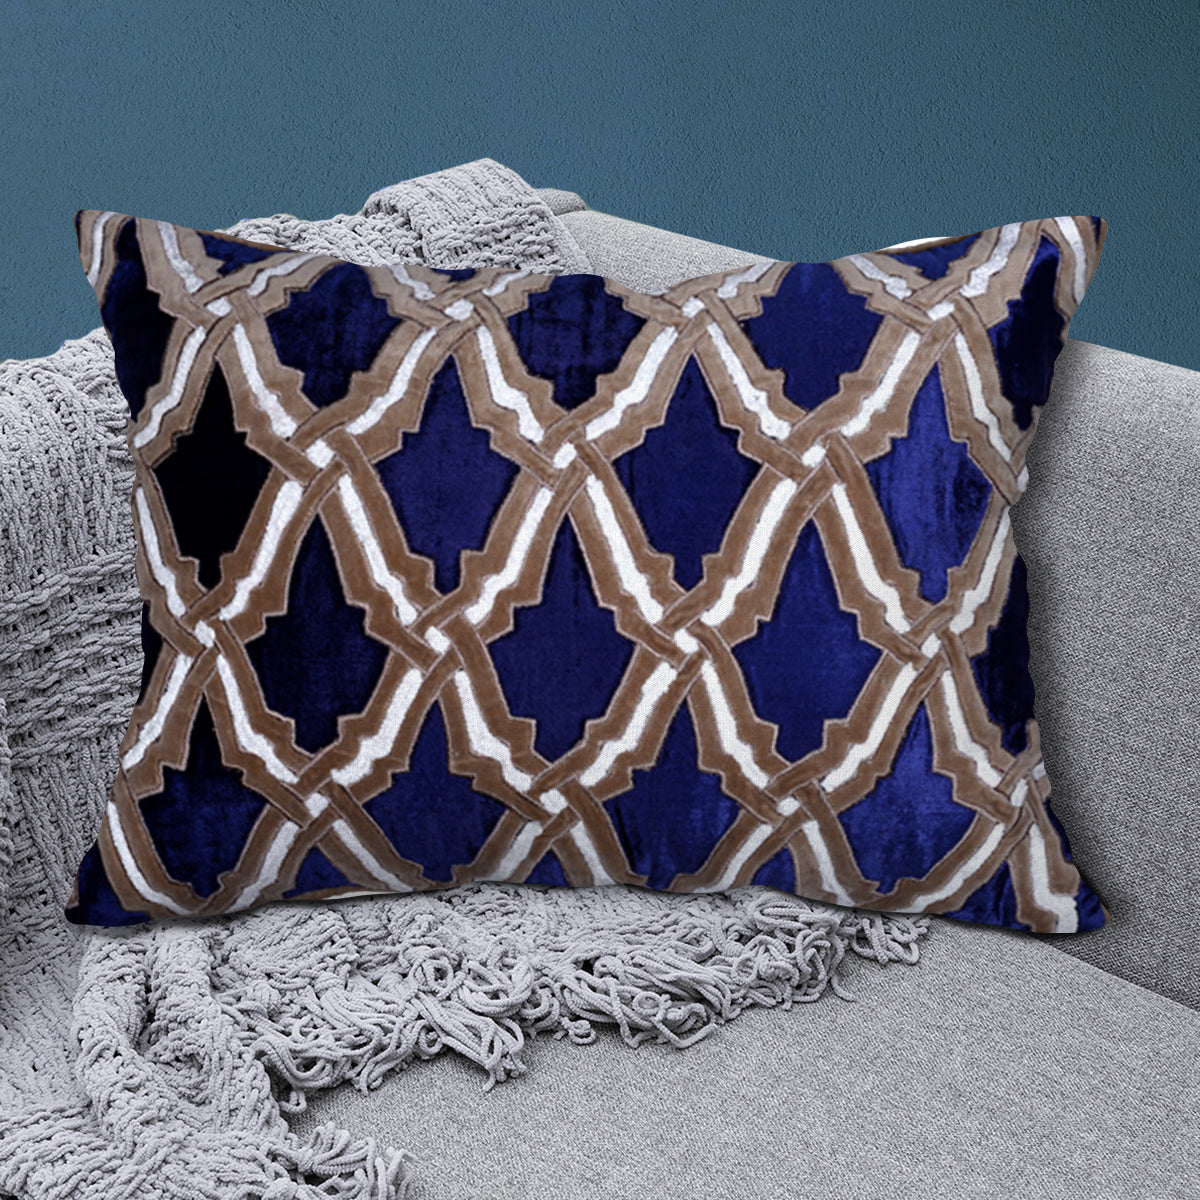 Navy Blue Throw Pillow Covers - Set of 2 and 4, 18 x 18 Inches Set of 2